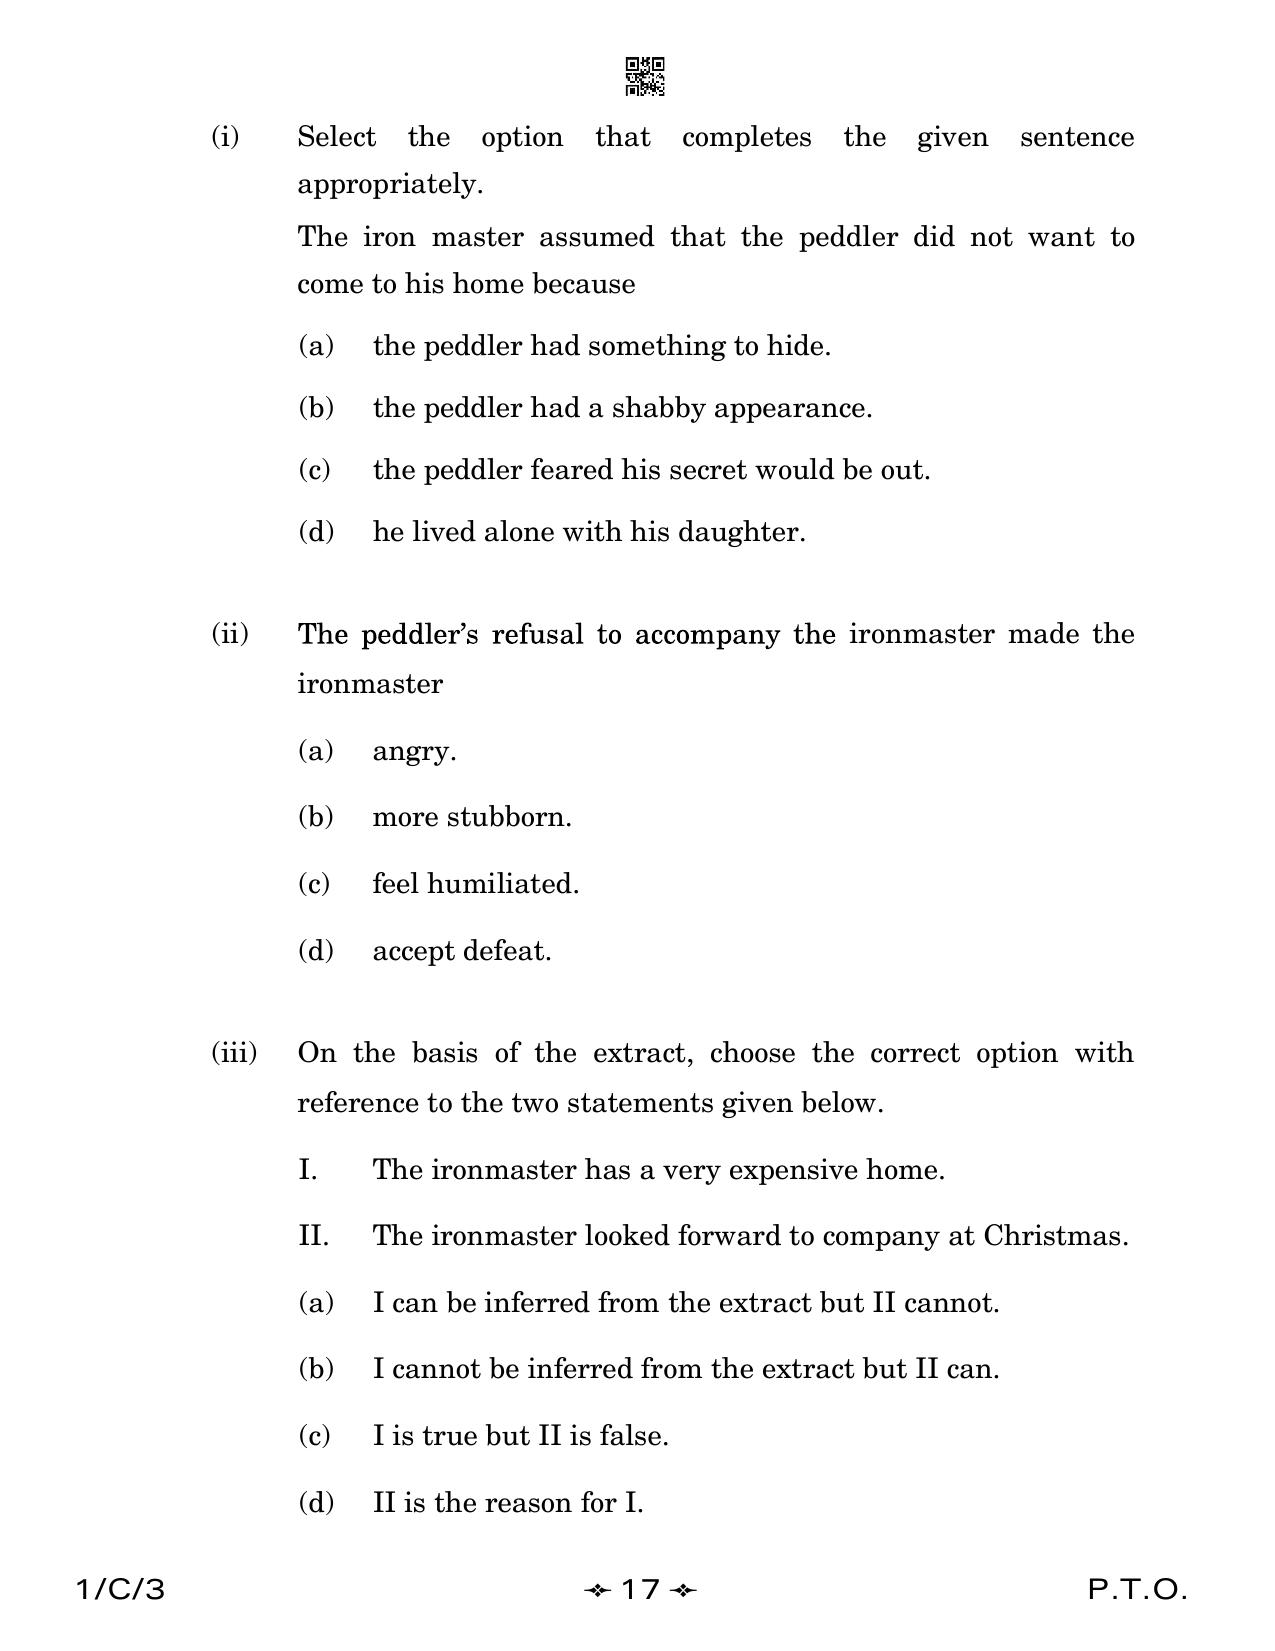 CBSE Class 12 1-3 English Core 2023 (Compartment) Question Paper - Page 17